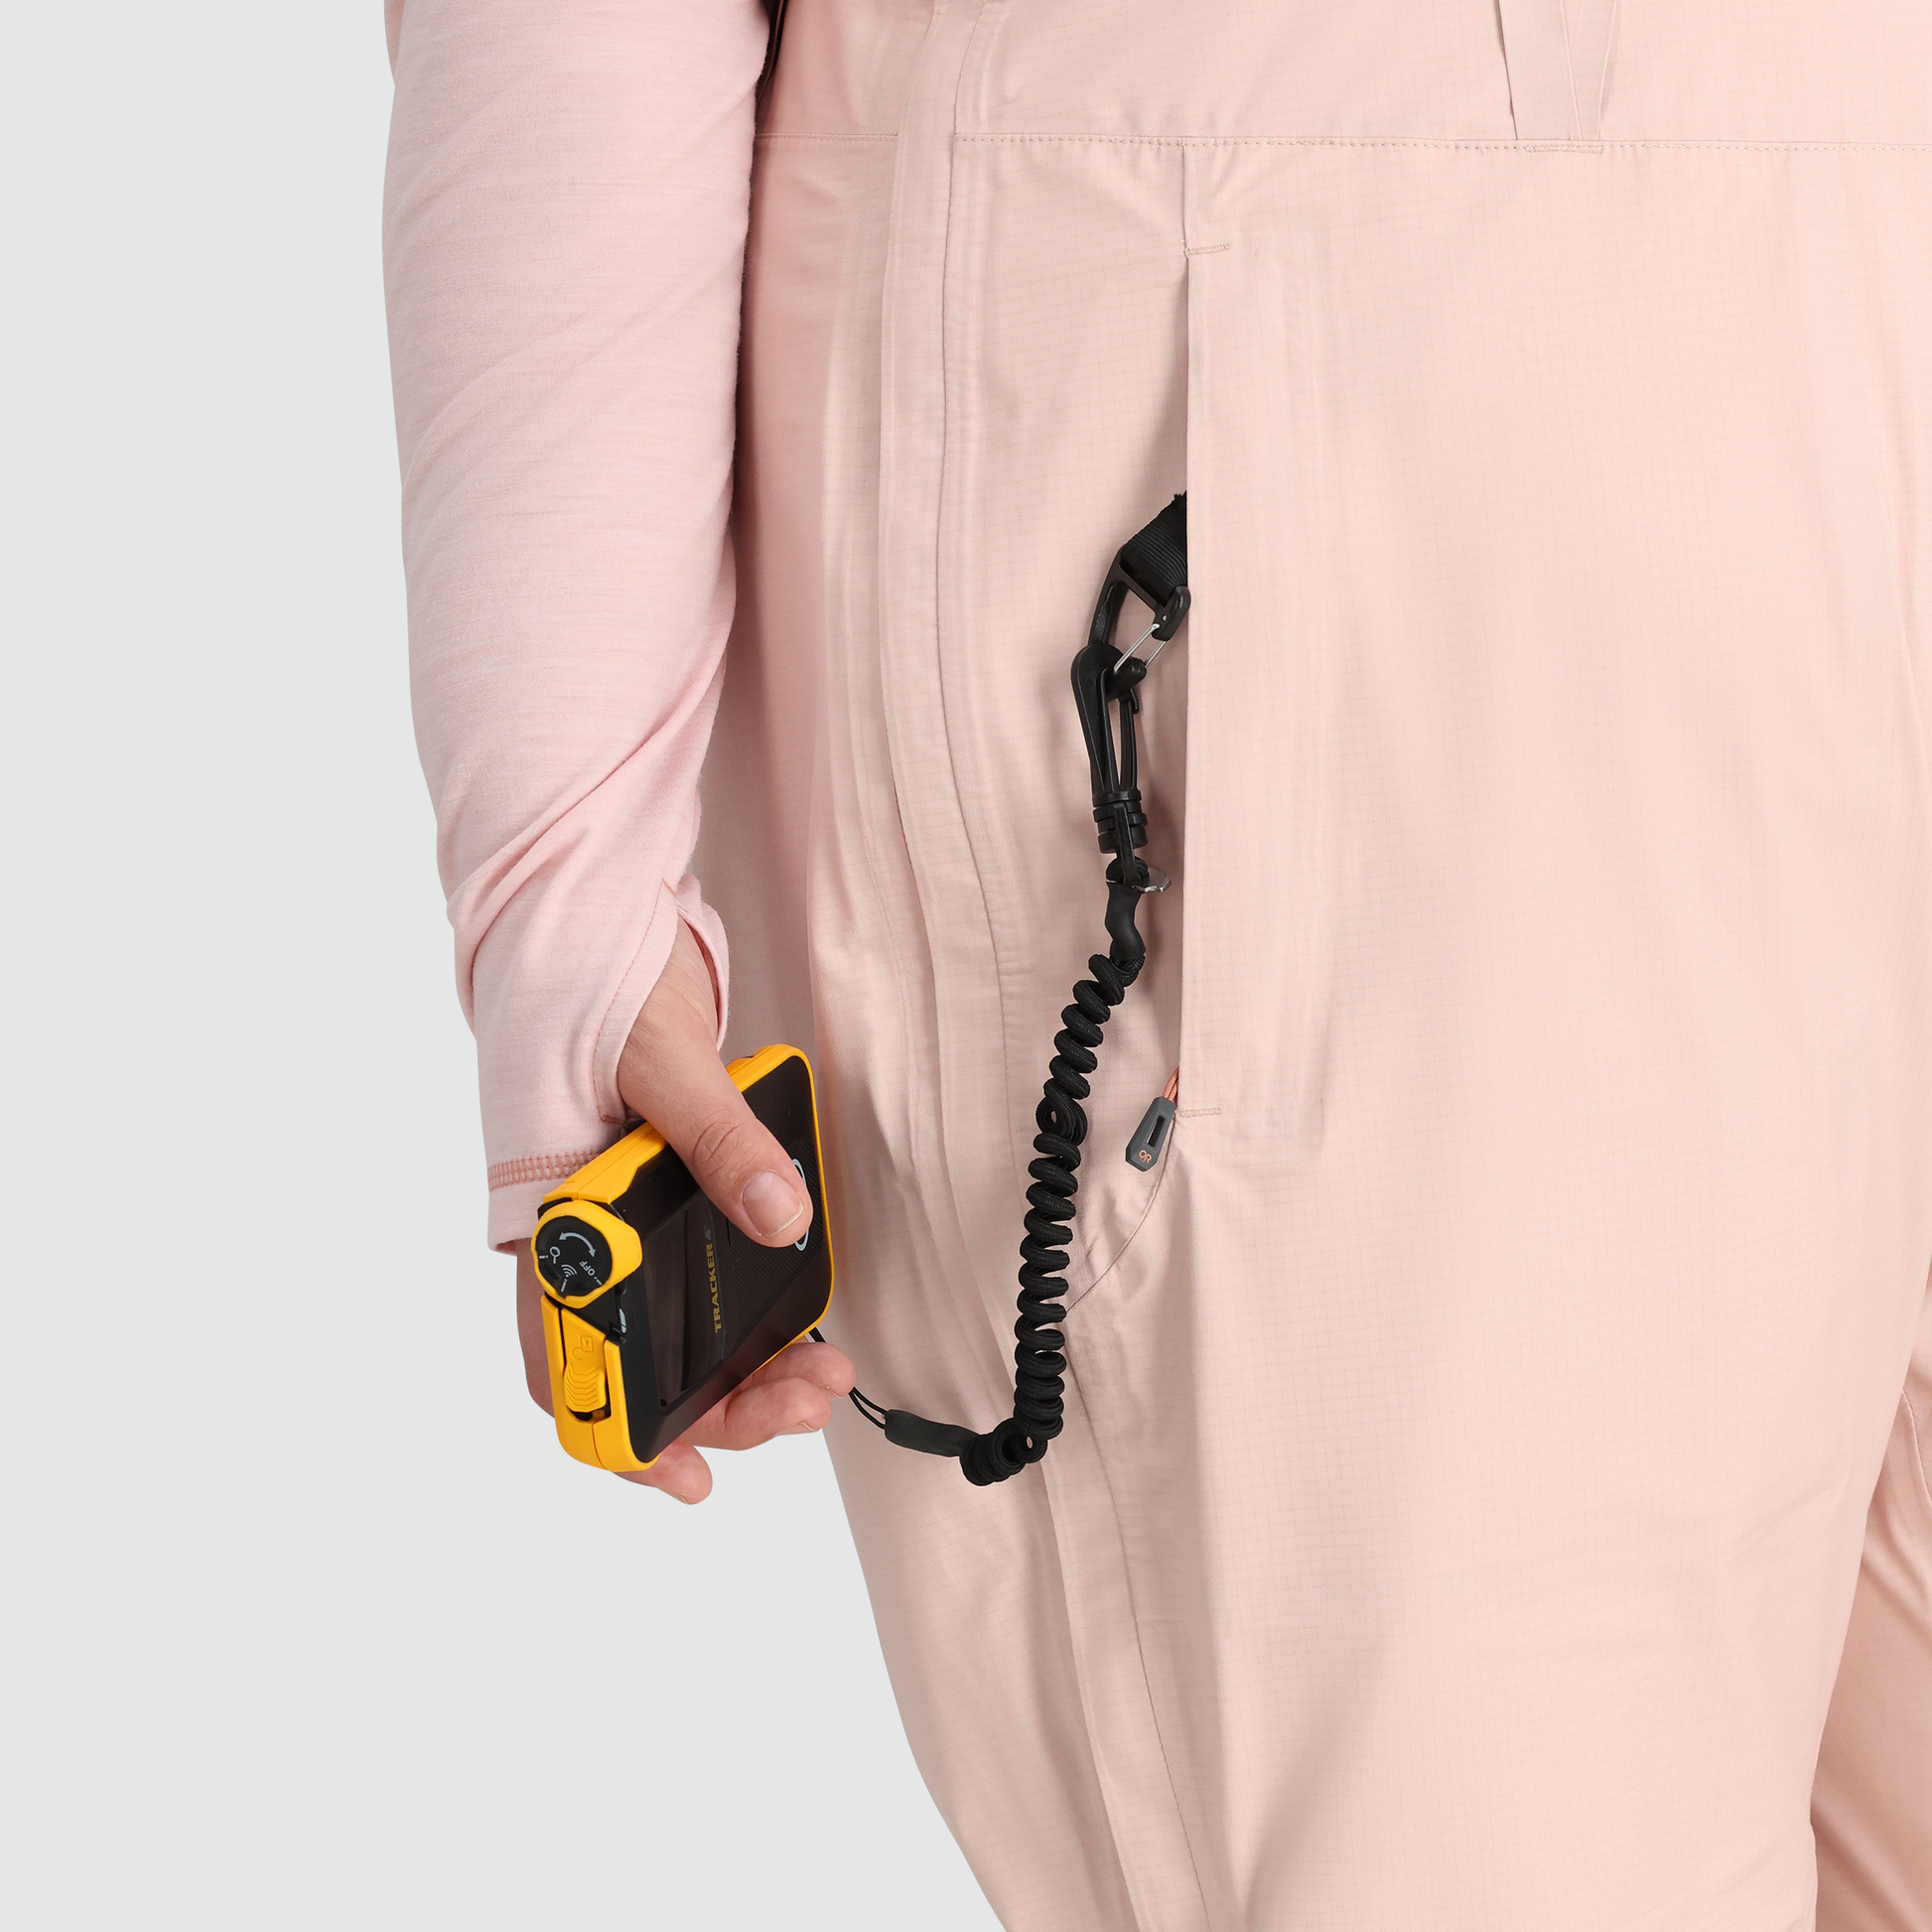 B2 :: Beacon Pocket / Keep your avalanche beacon secure with this specially-designed pocket for comfort, closeness, and safety.